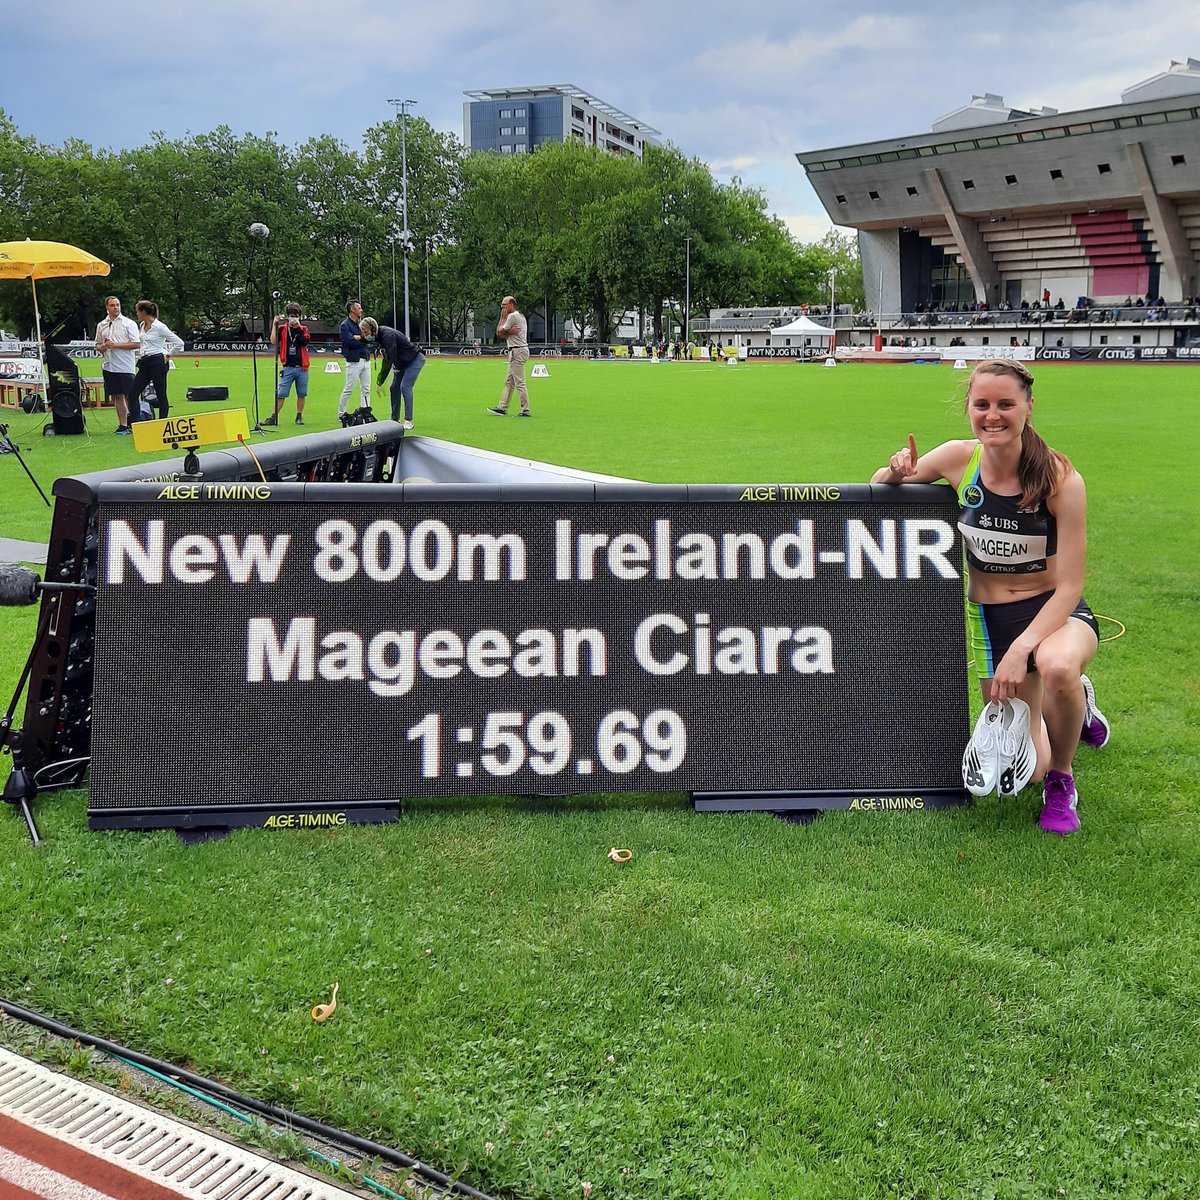 Irish Record and the first Irish woman ever to go under 2 minutes in the 800m. I am absolutely delighted. With the disappointment of everything this year, Olympics postponed and lockdown for months, my coach, my team mates and I put our heads down and worked hard. Continued⬇️